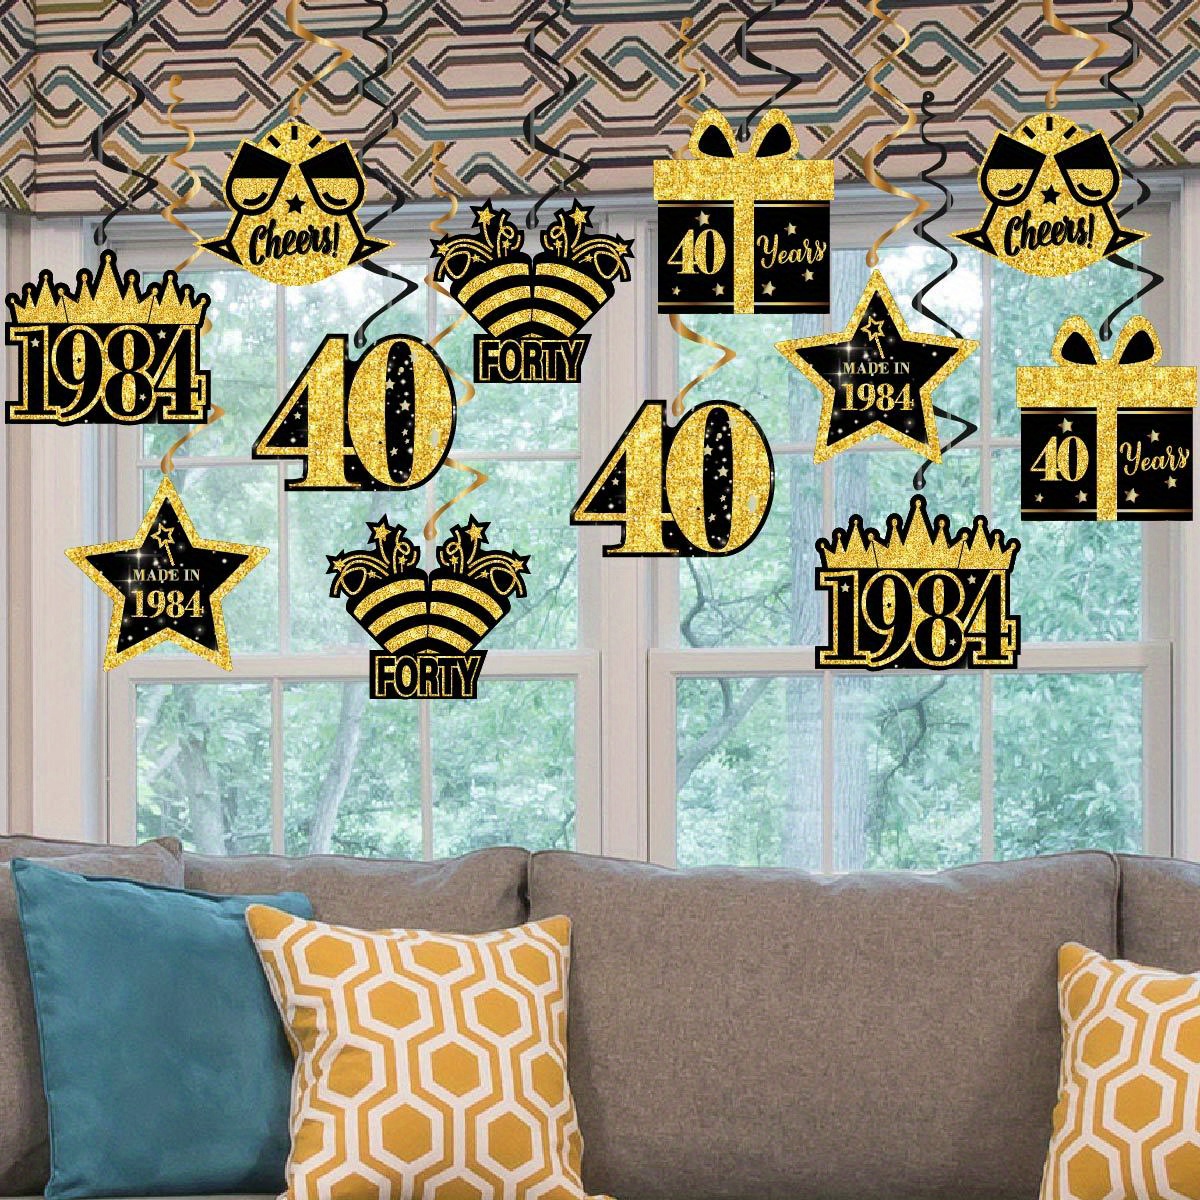 

24pcs 40th Birthday Party Decorations - 1984 Vintage Hanging Swirls, Ceiling Streamers, Paper & Rubber Spirals, No Feathers, Electricity-free For 40th Birthday Celebration